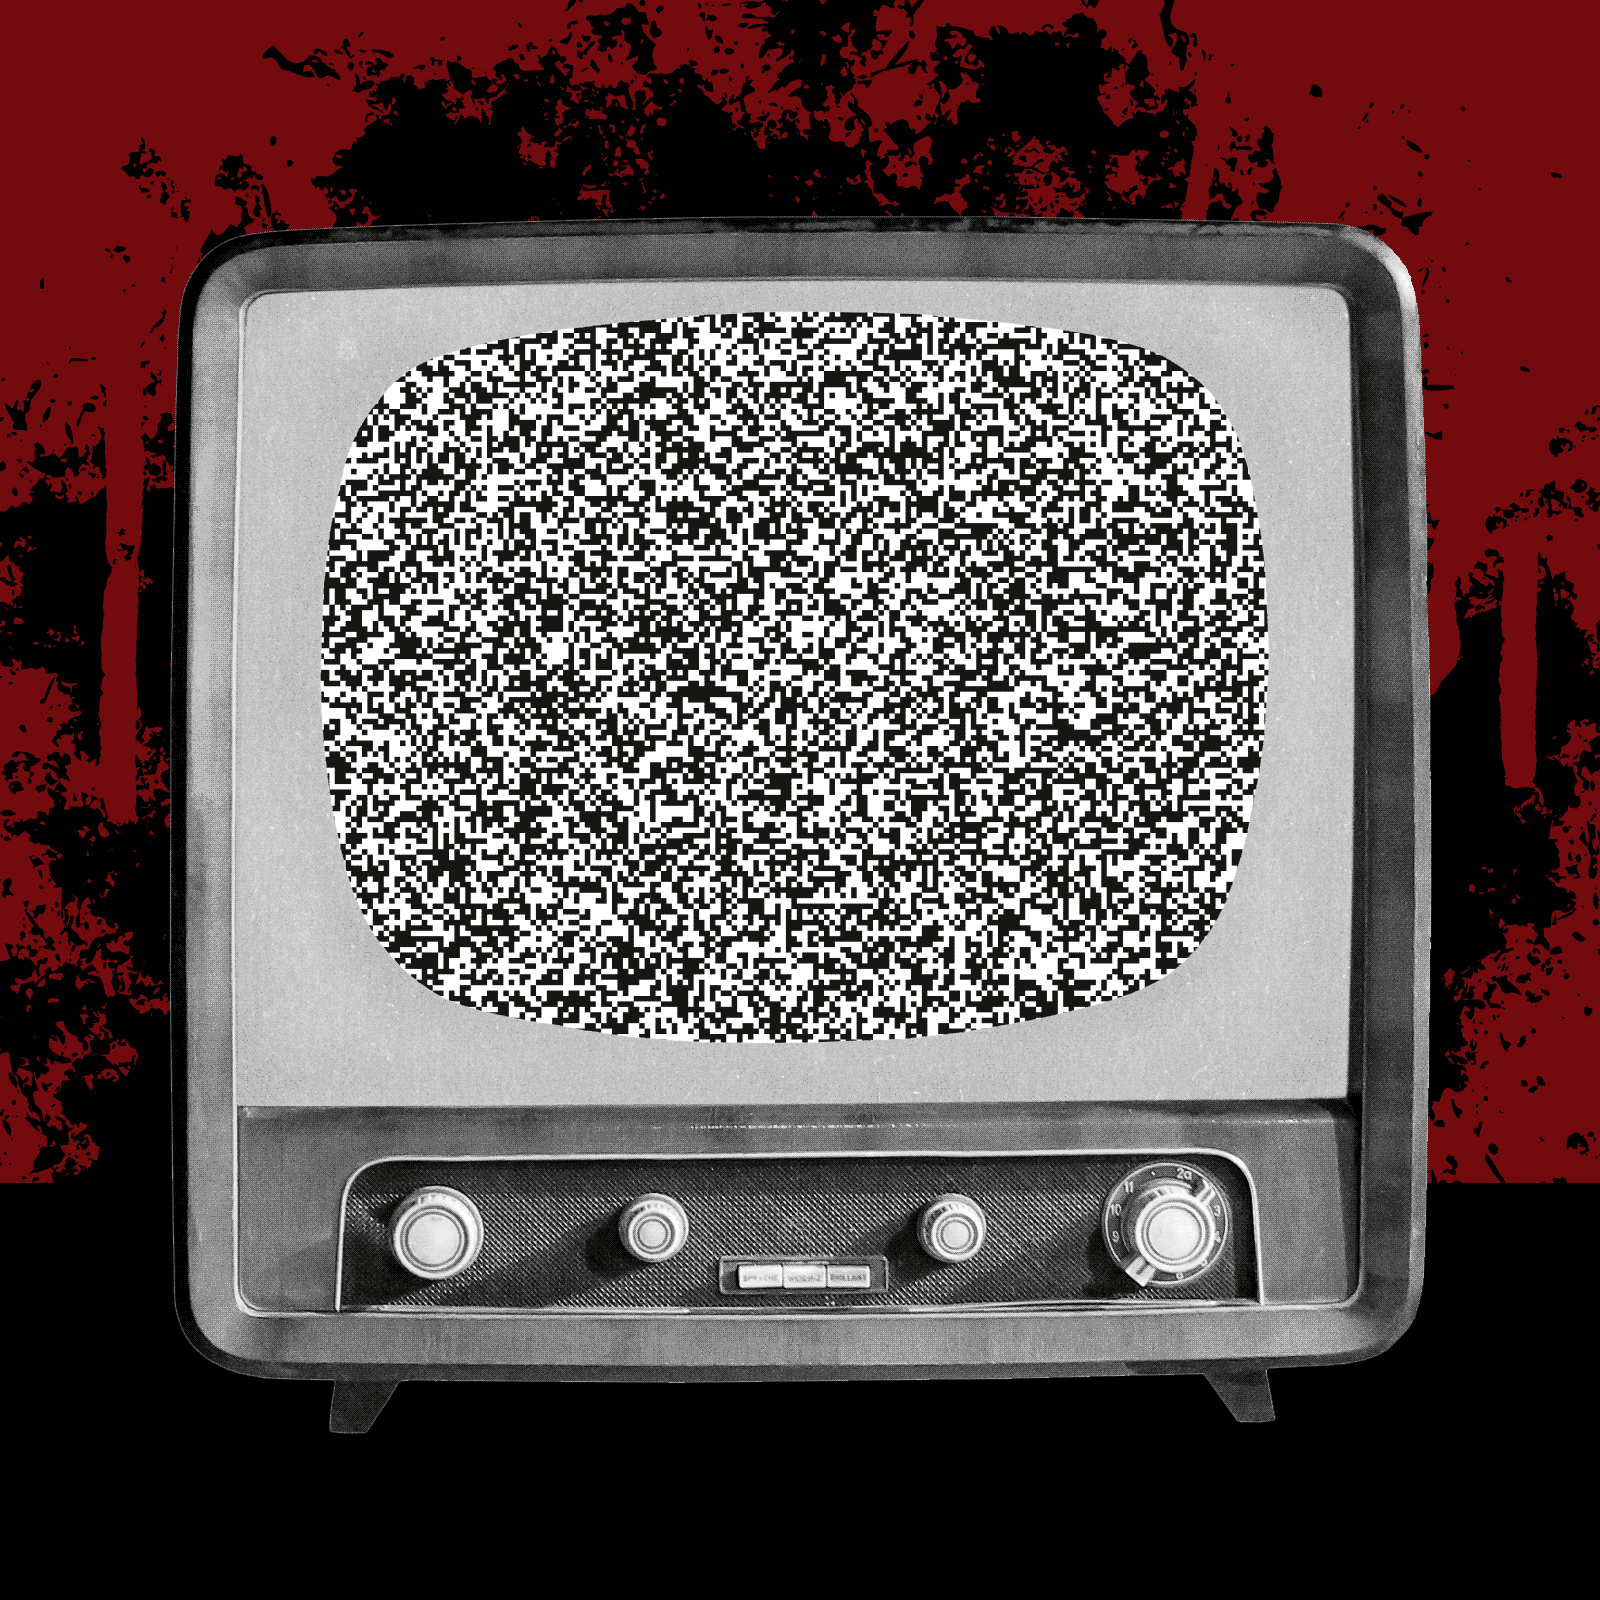 Question mark on an old television set with static, horror background